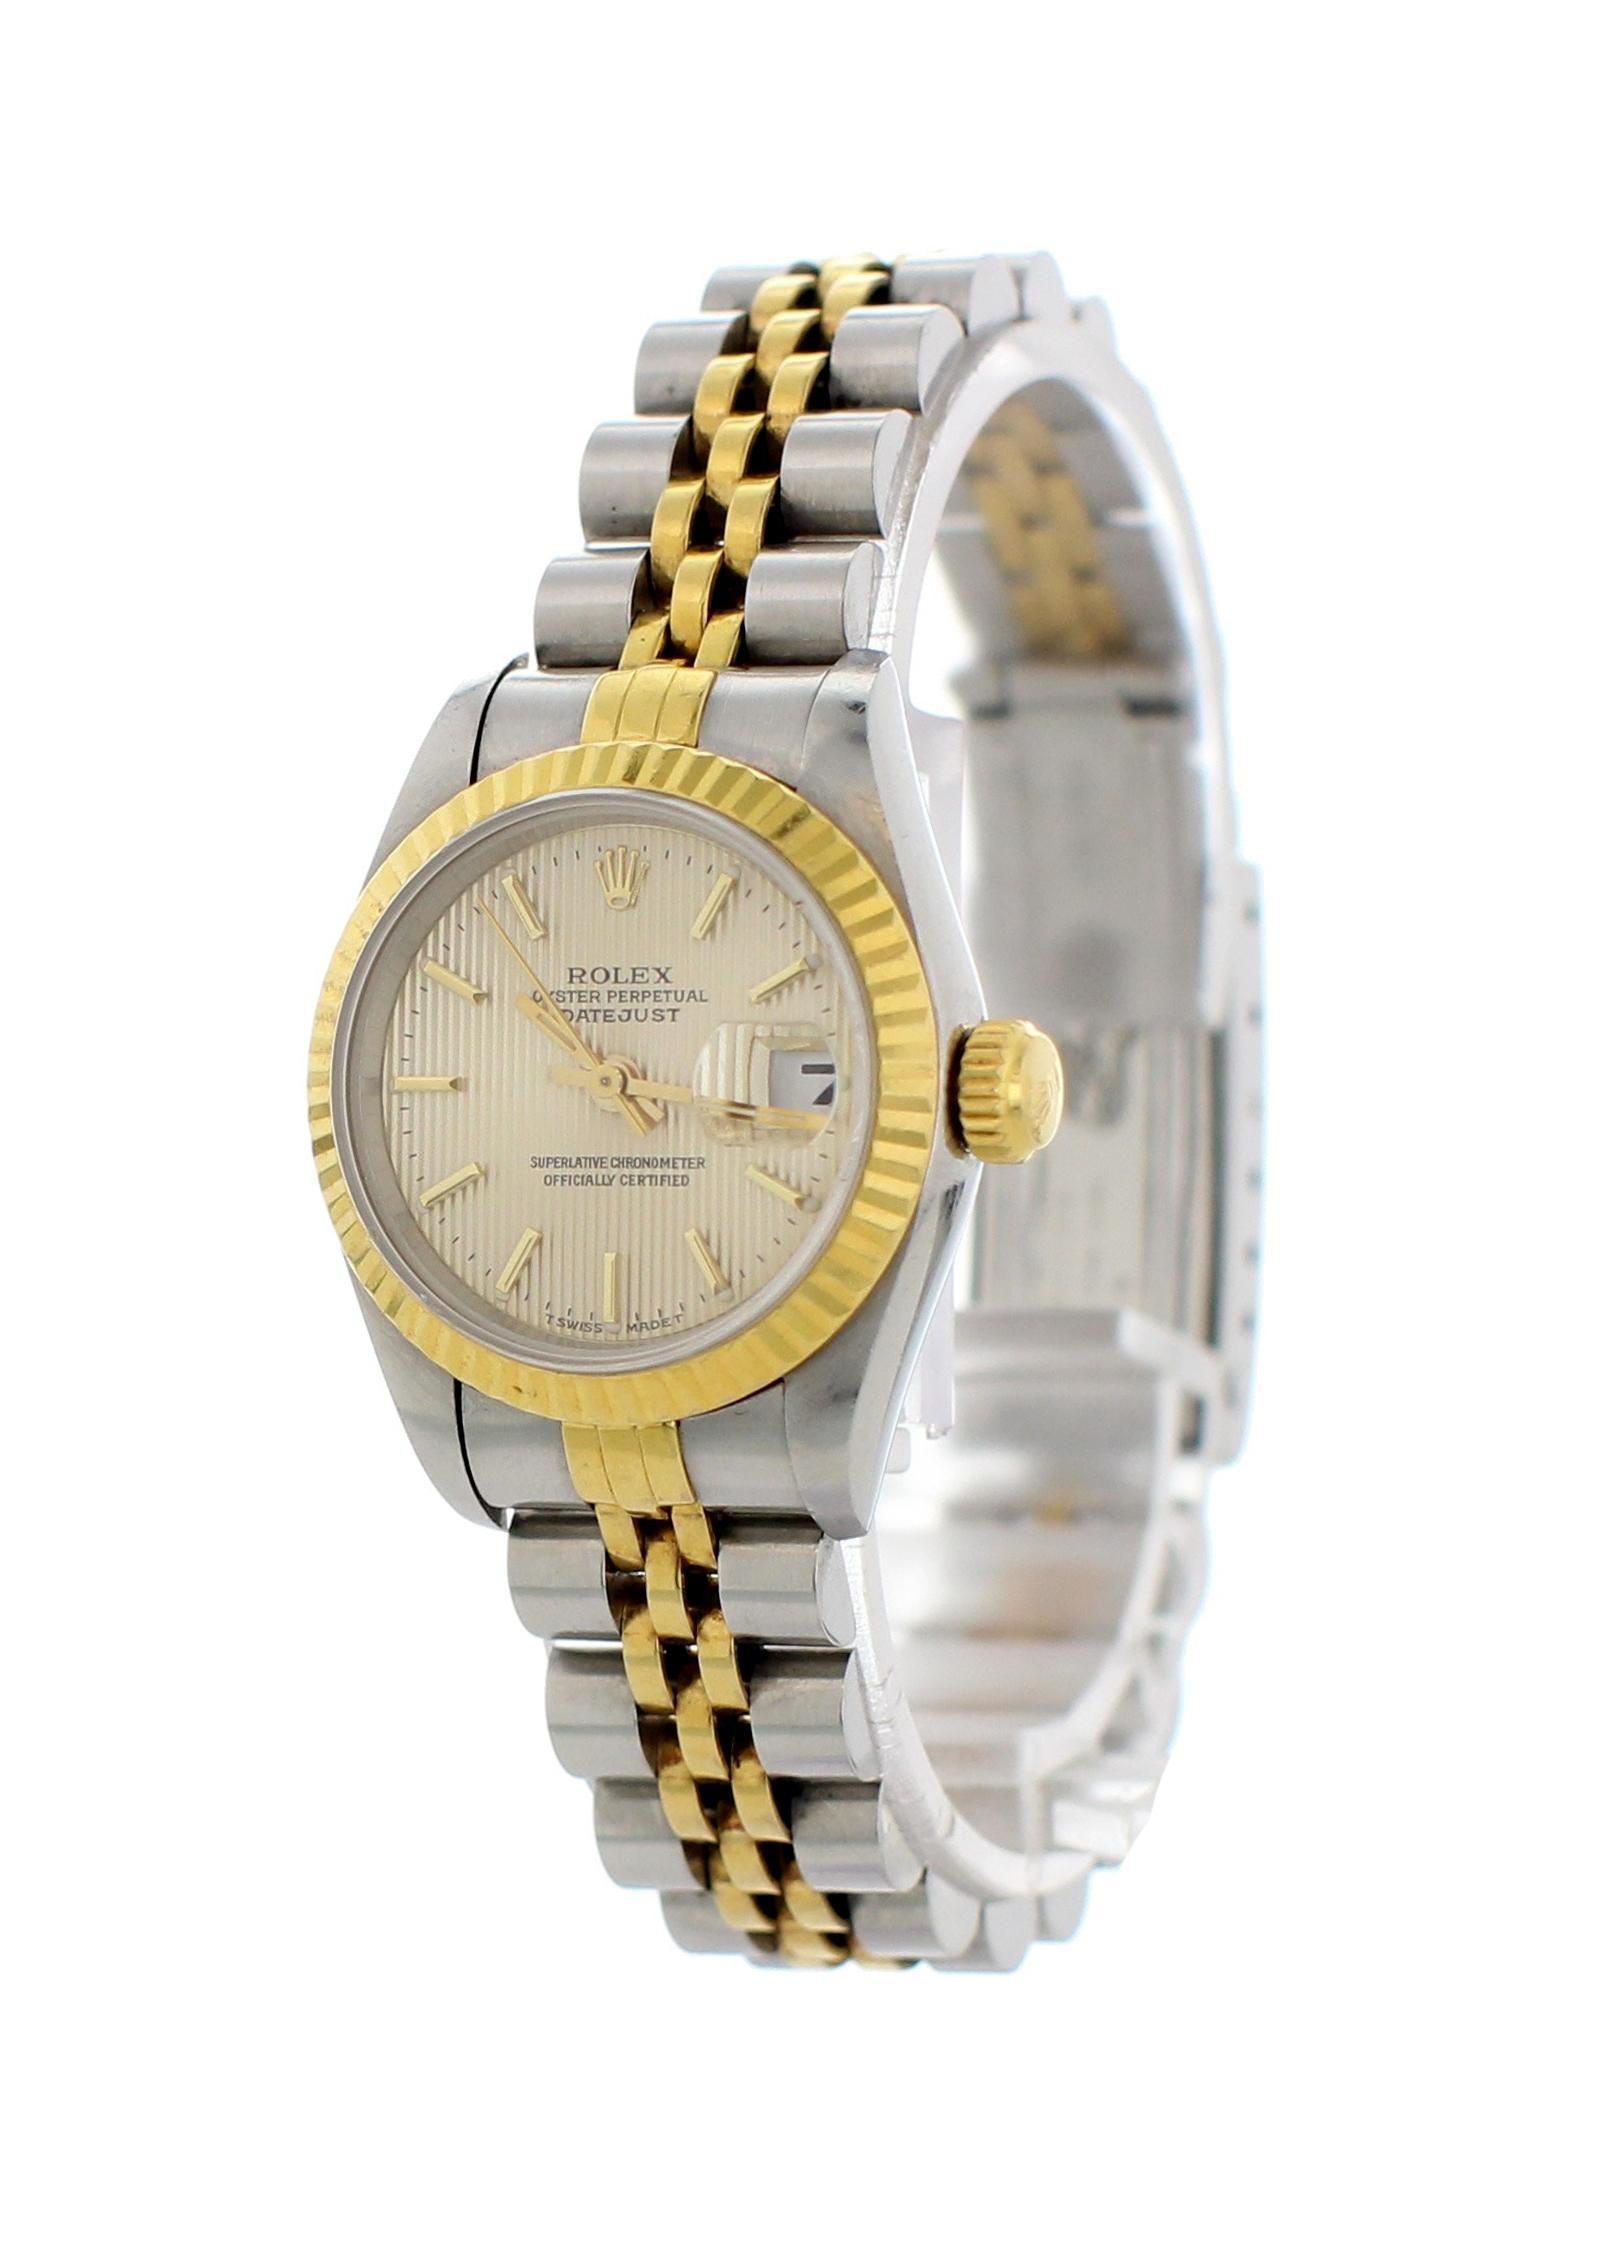 Rolex Oyster Perpetual Datejust Tapestry Dial Ladies Watch. Reference 69173. 26 mm stainless steel case. 18k yellow gold fluted bezel. Cream tapestry dial with yellow gold hands and stick markers. 18k yellow gold and stainless steel Jubilee band